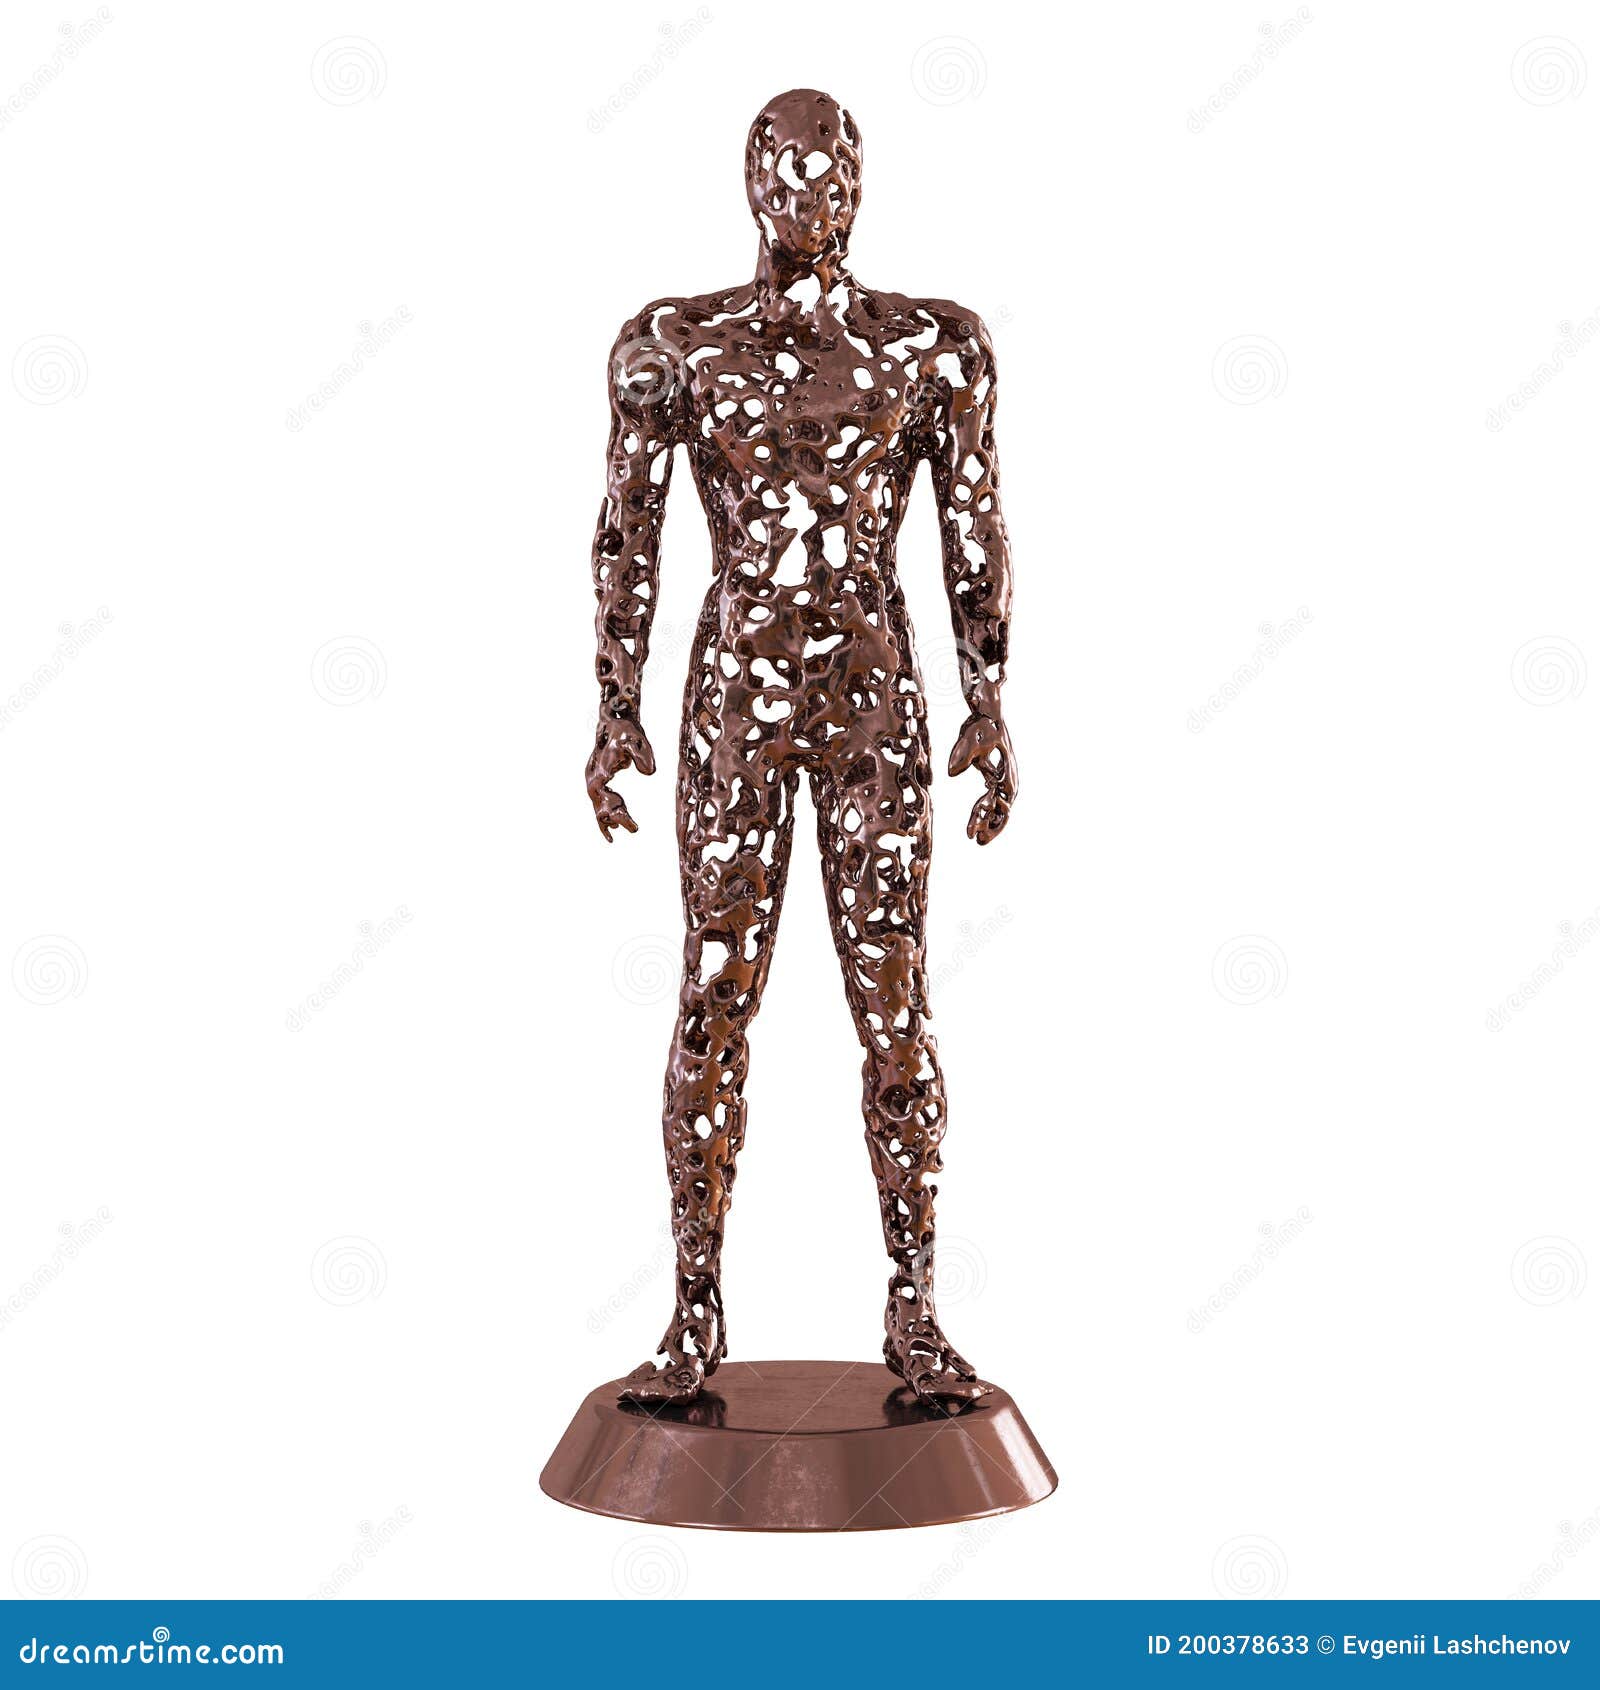 Iron Sculpture of a Man Made of Metal with Many Holes All Over His